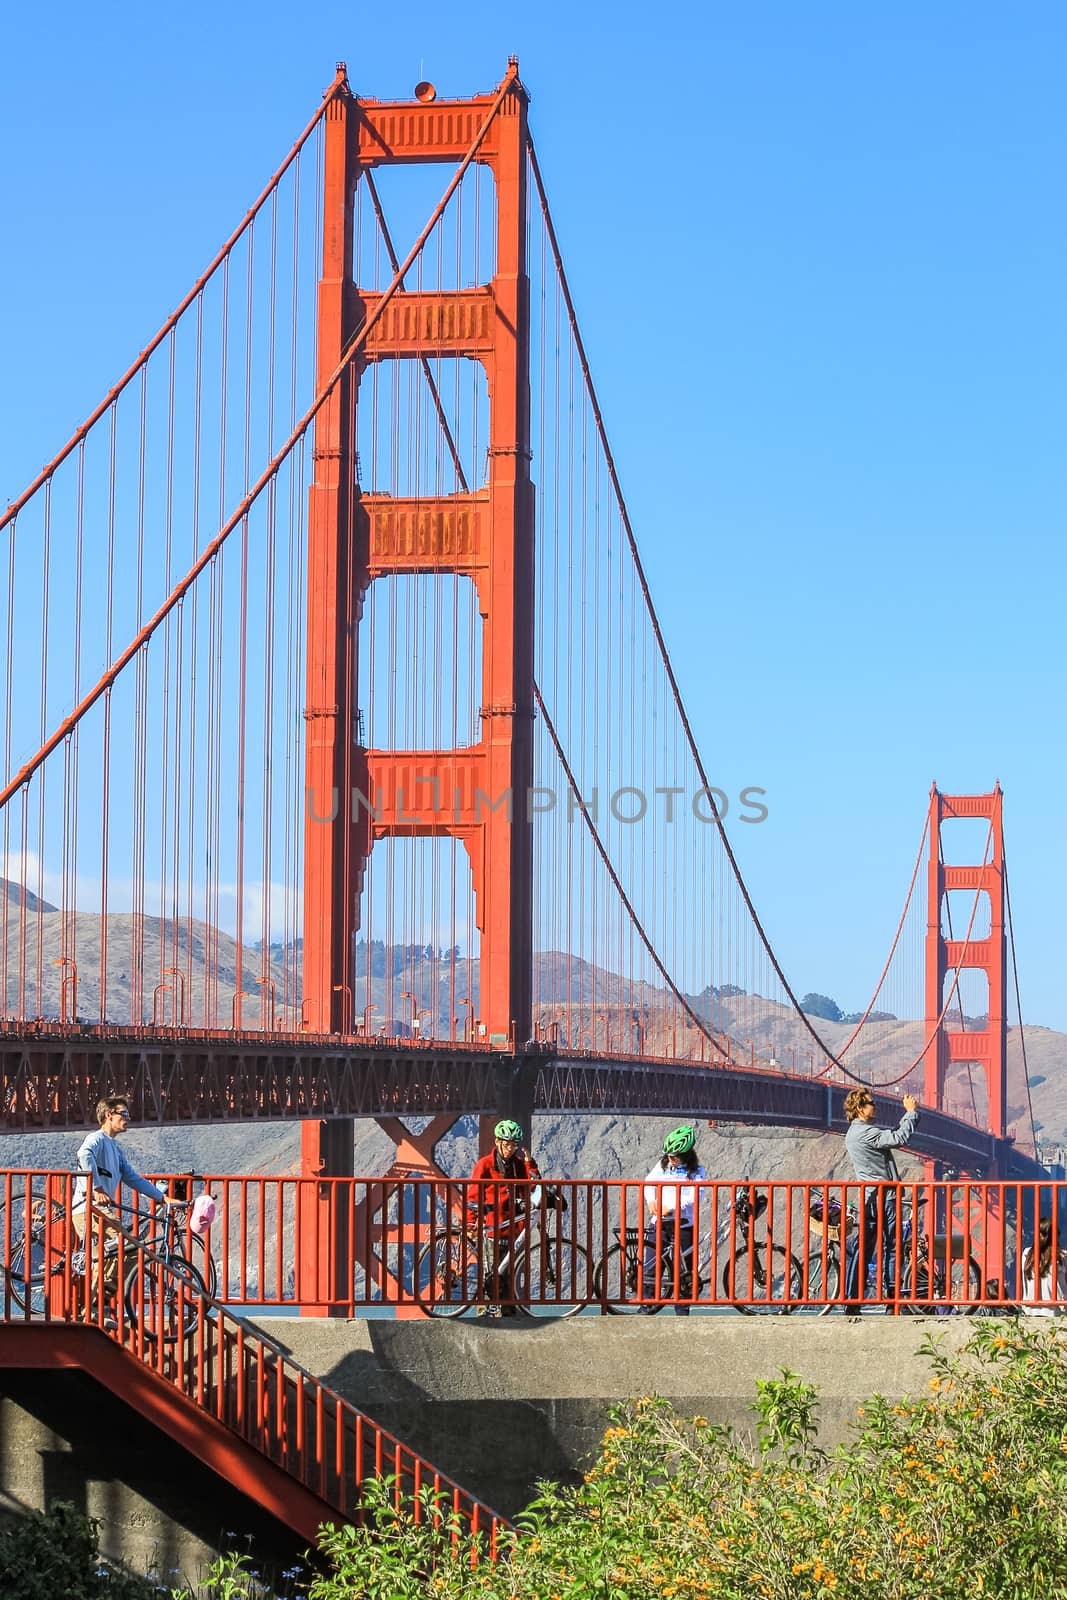 San Francisco, USA - October 8: People ride a bicycle with a Golden Gate bridge in the background on October 8, 2011 in San Francisco, USA.